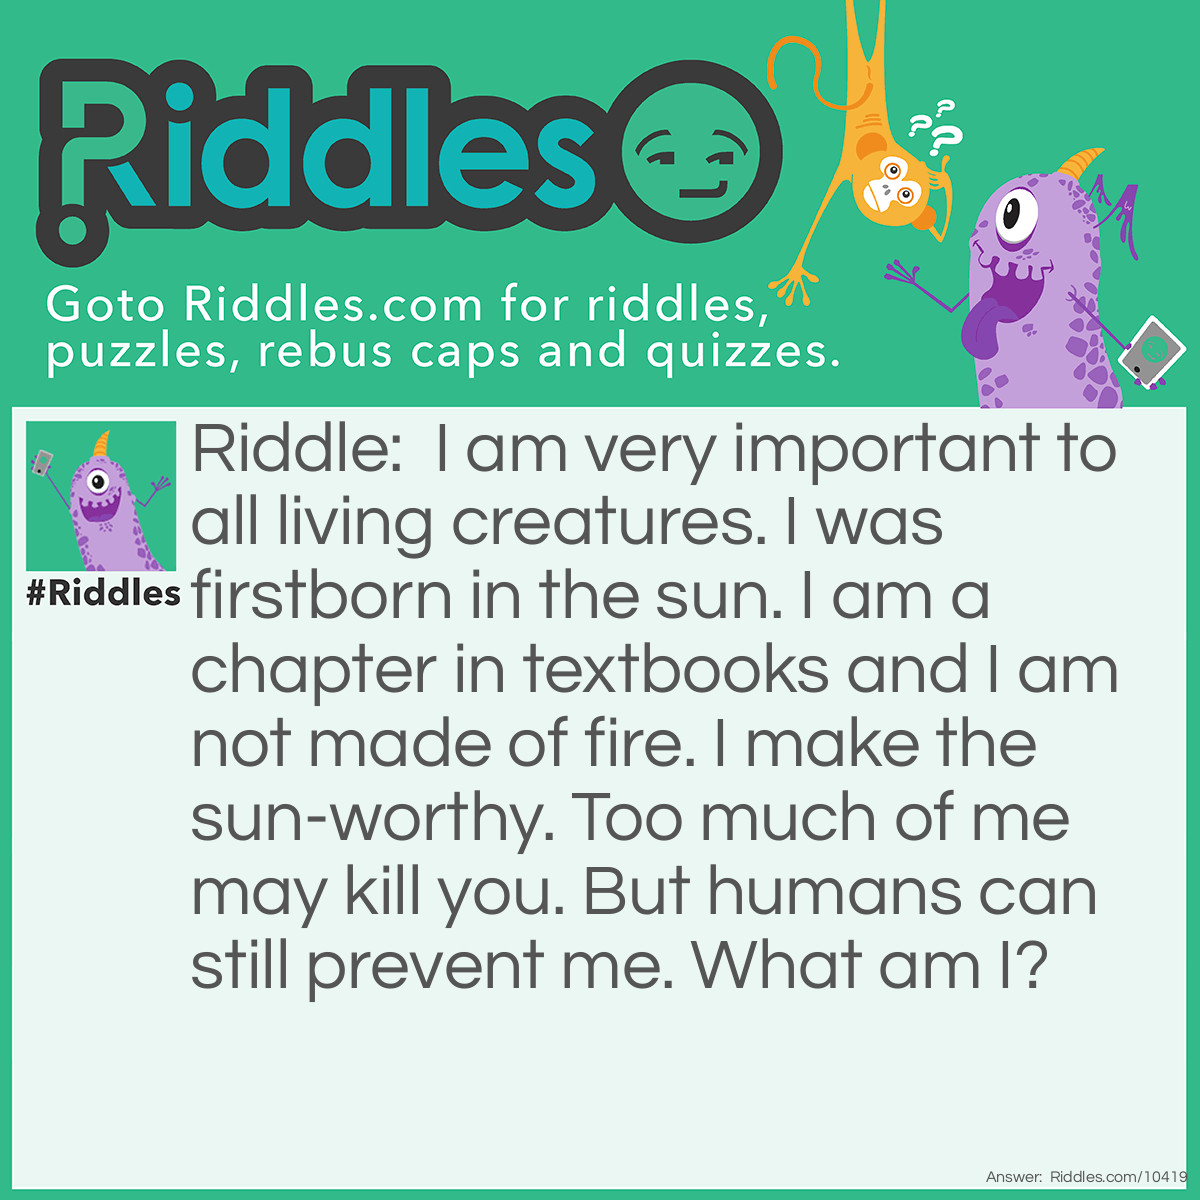 Riddle: I am very important to all living creatures. I was firstborn in the sun. I am a chapter in textbooks and I am not made of fire. I make the sun-worthy. Too much of me may kill you. But humans can still prevent me. What am I? Answer: Heat!